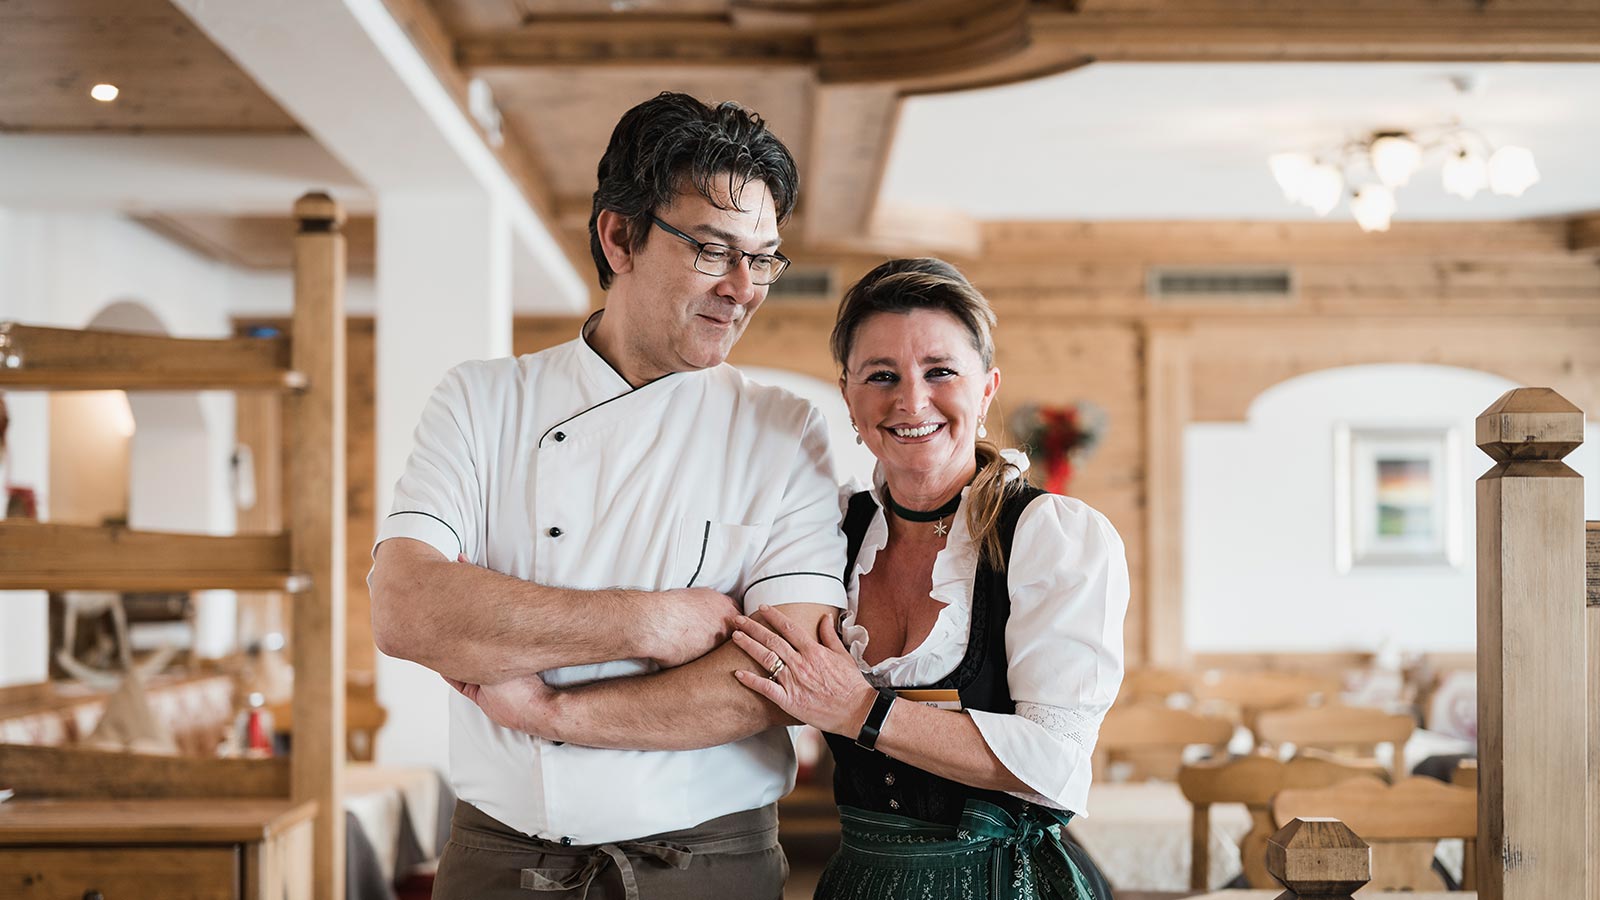 The chef of the Hotel Laguscei in Arabba together with a waitress in the wooden dining room